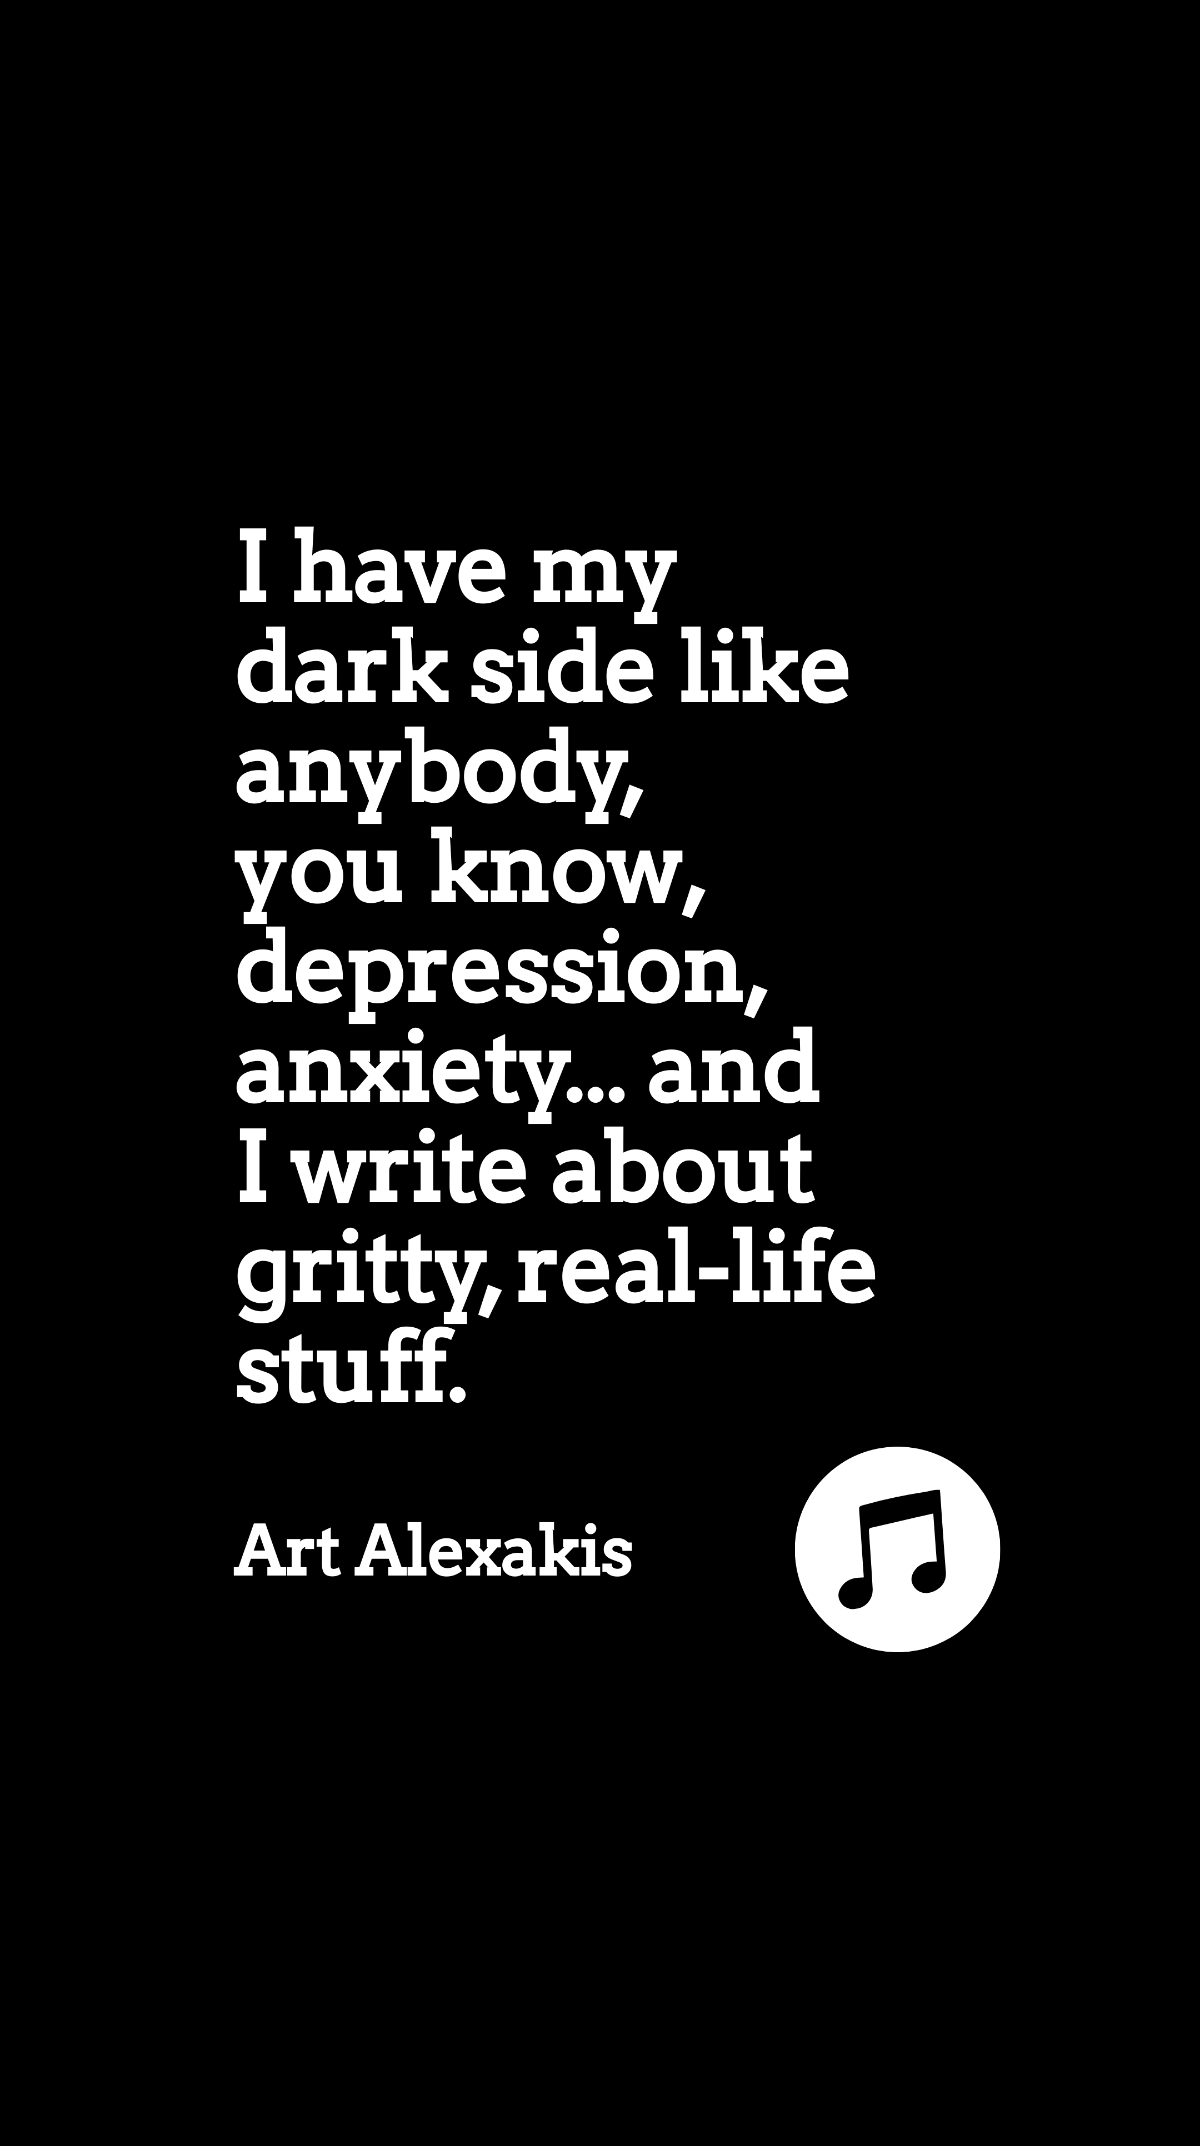 Free Art Alexakis - I have my dark side like anybody, you know, depression, anxiety... and I write about gritty, real-life stuff. Template